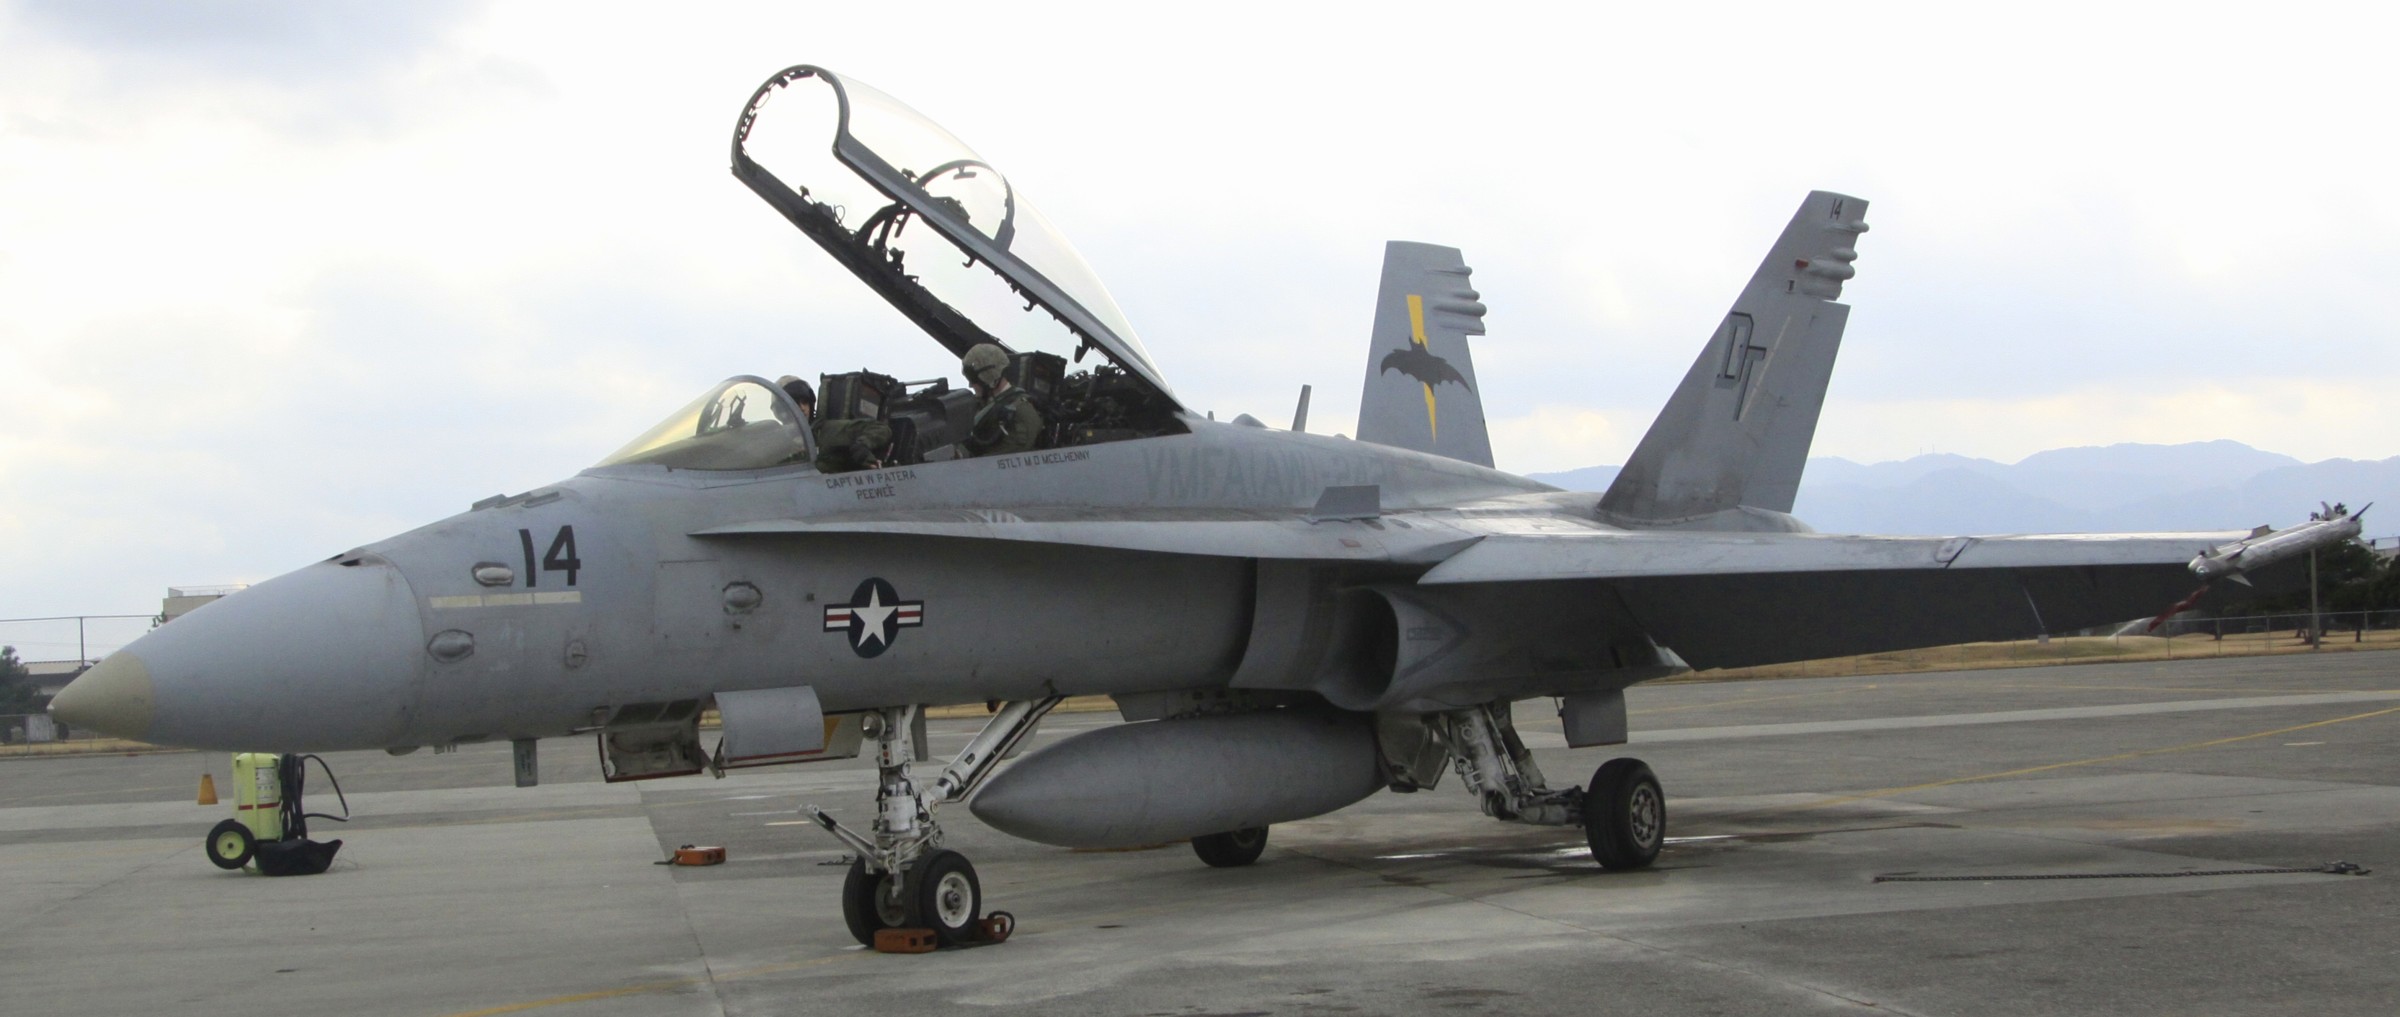 vmfa(aw)-242 bats marine all-weather fighter attack squadron usmc f/a-18d hornet 16 iwakuni japan